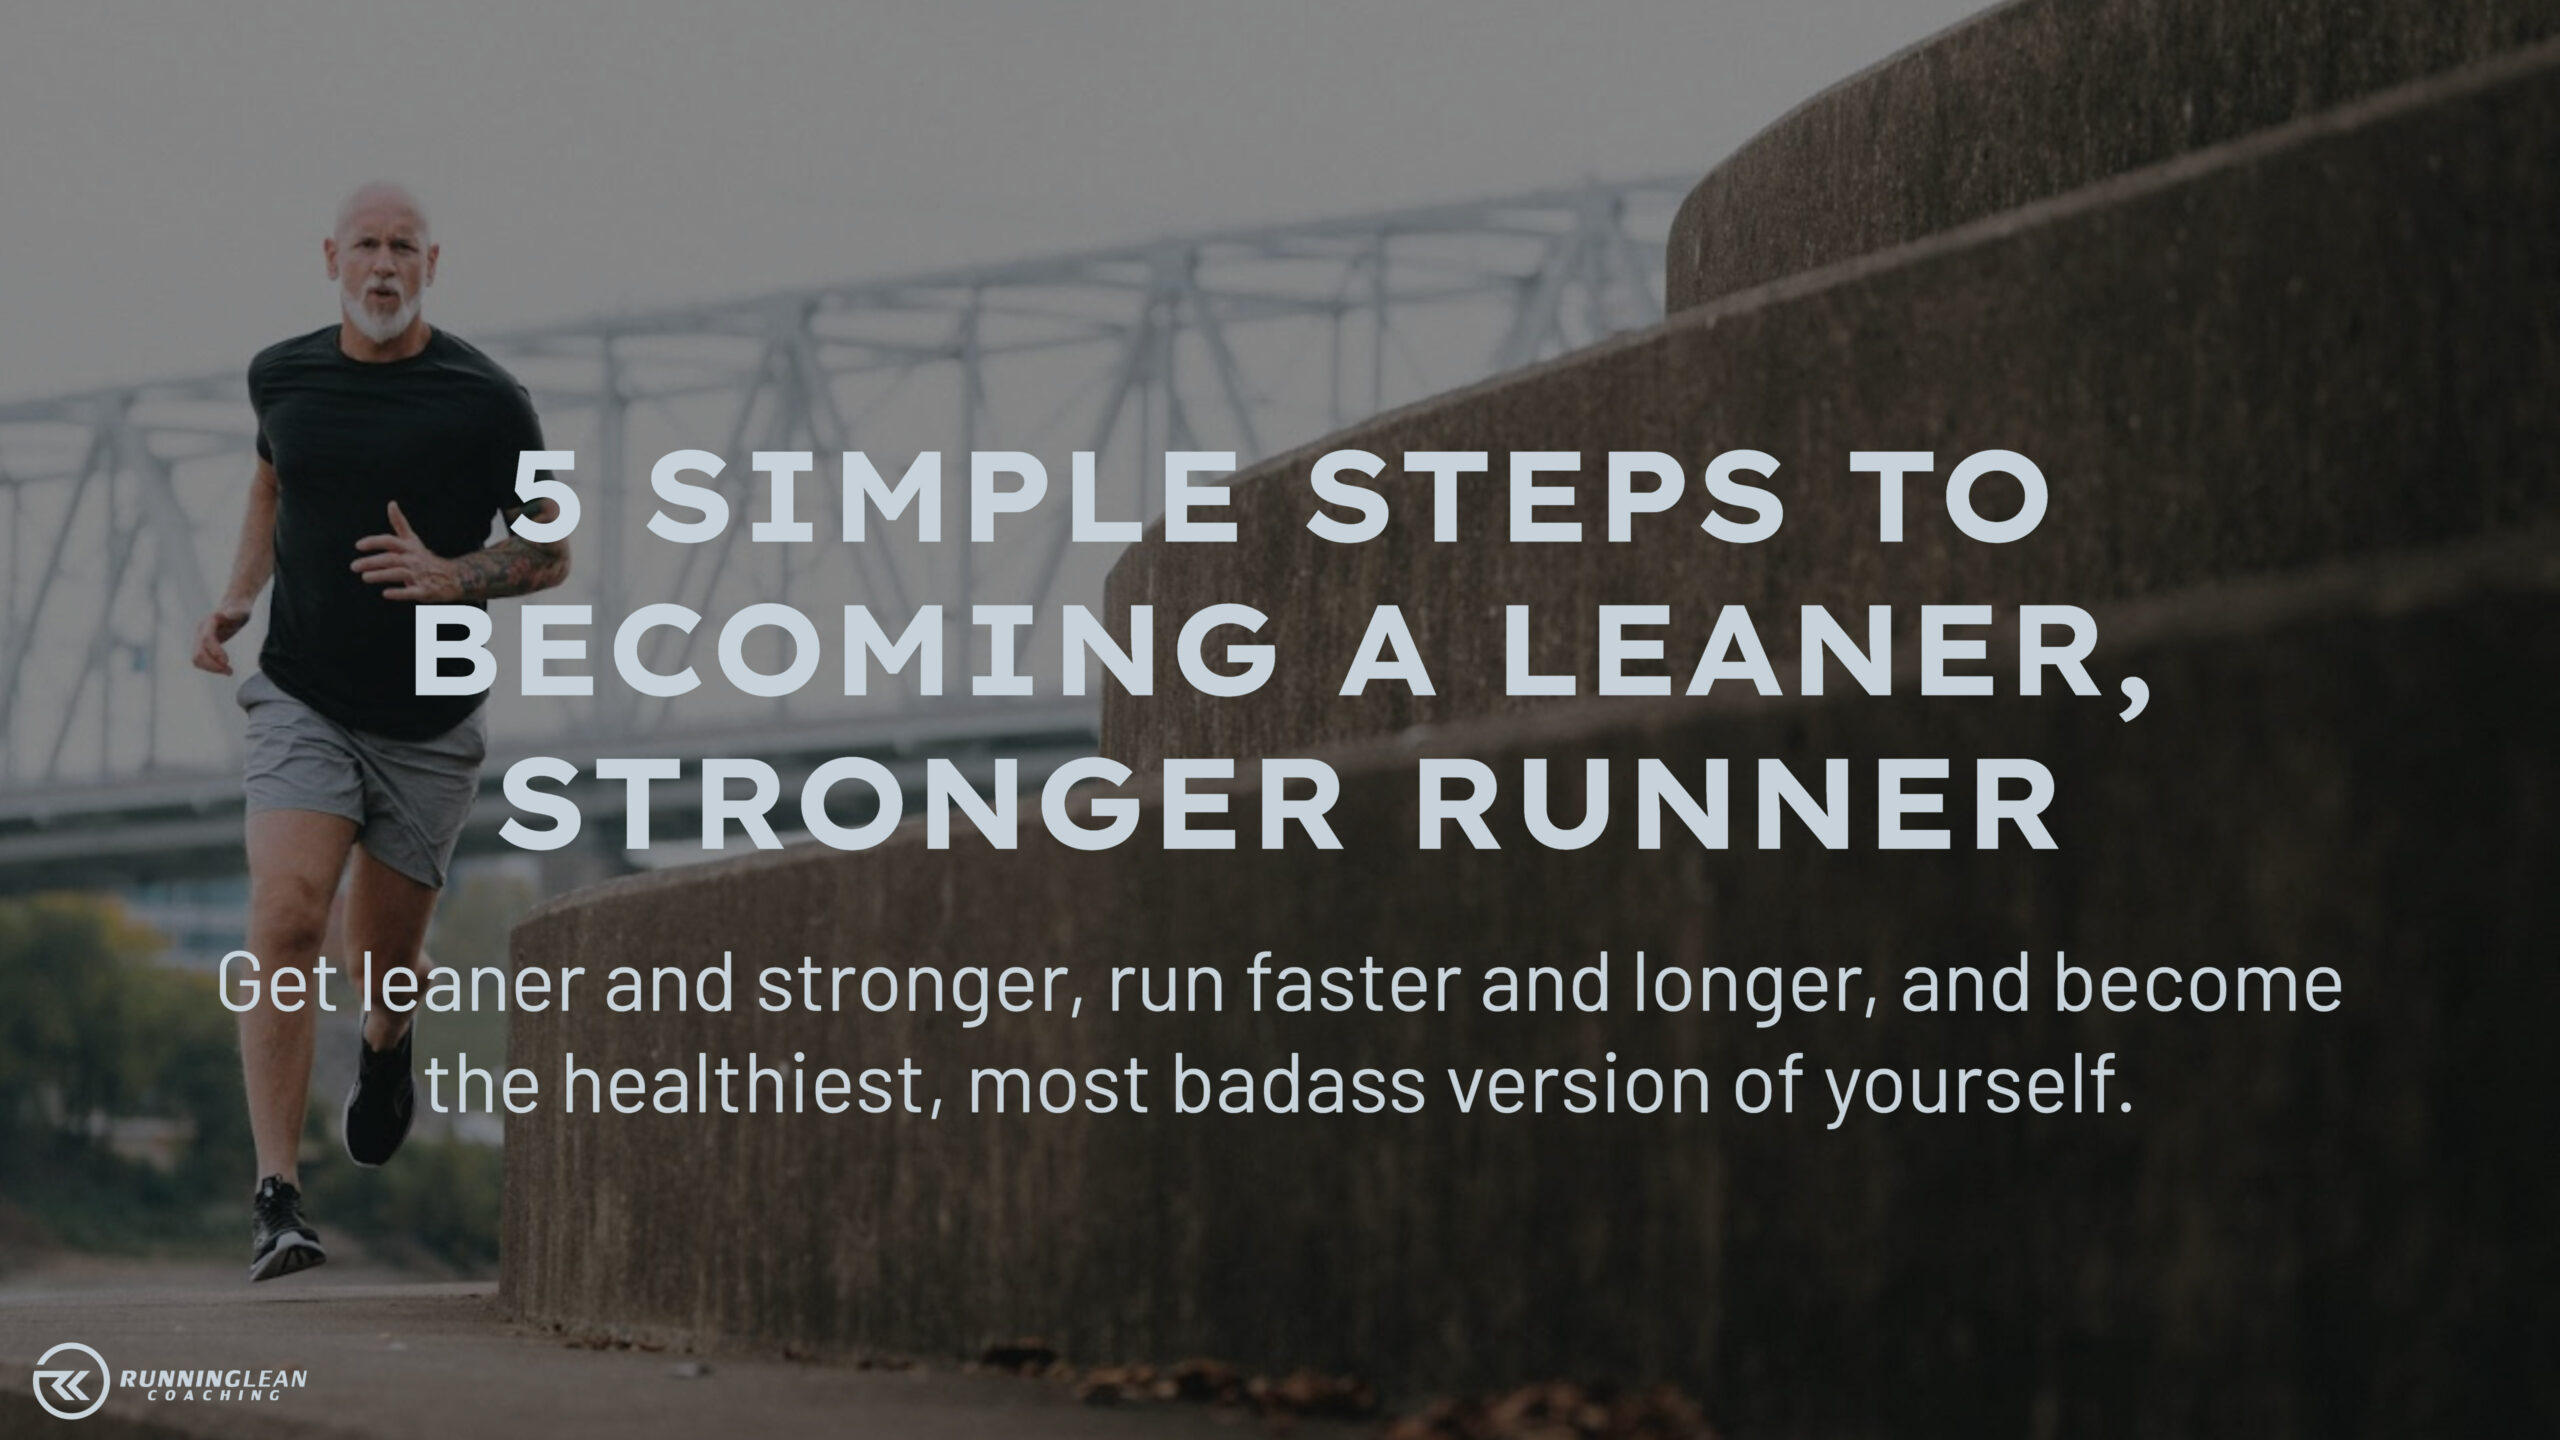 5 Simple Steps to Becoming a Leaner, Stronger Runner